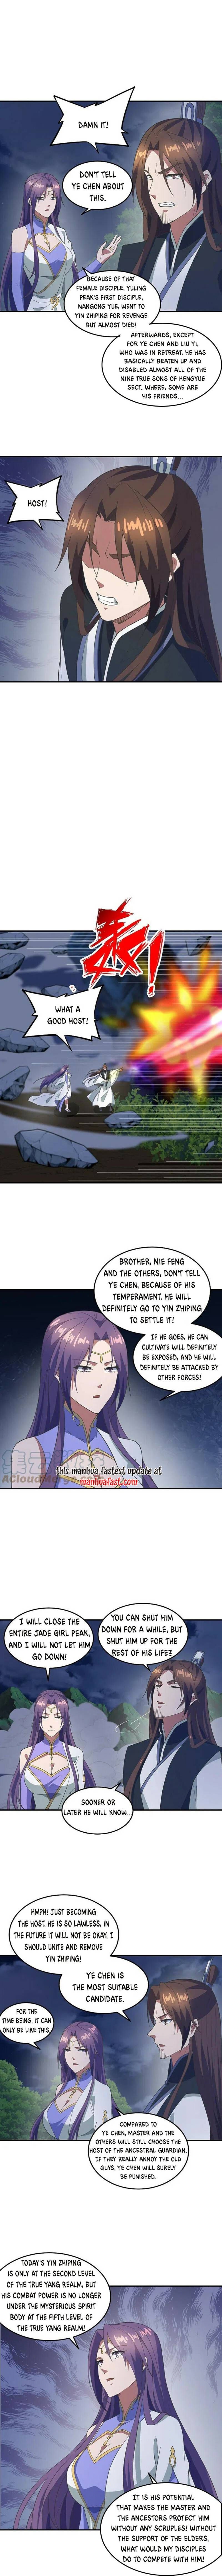 Banished Disciple's Counterattack Chapter 307 page 3